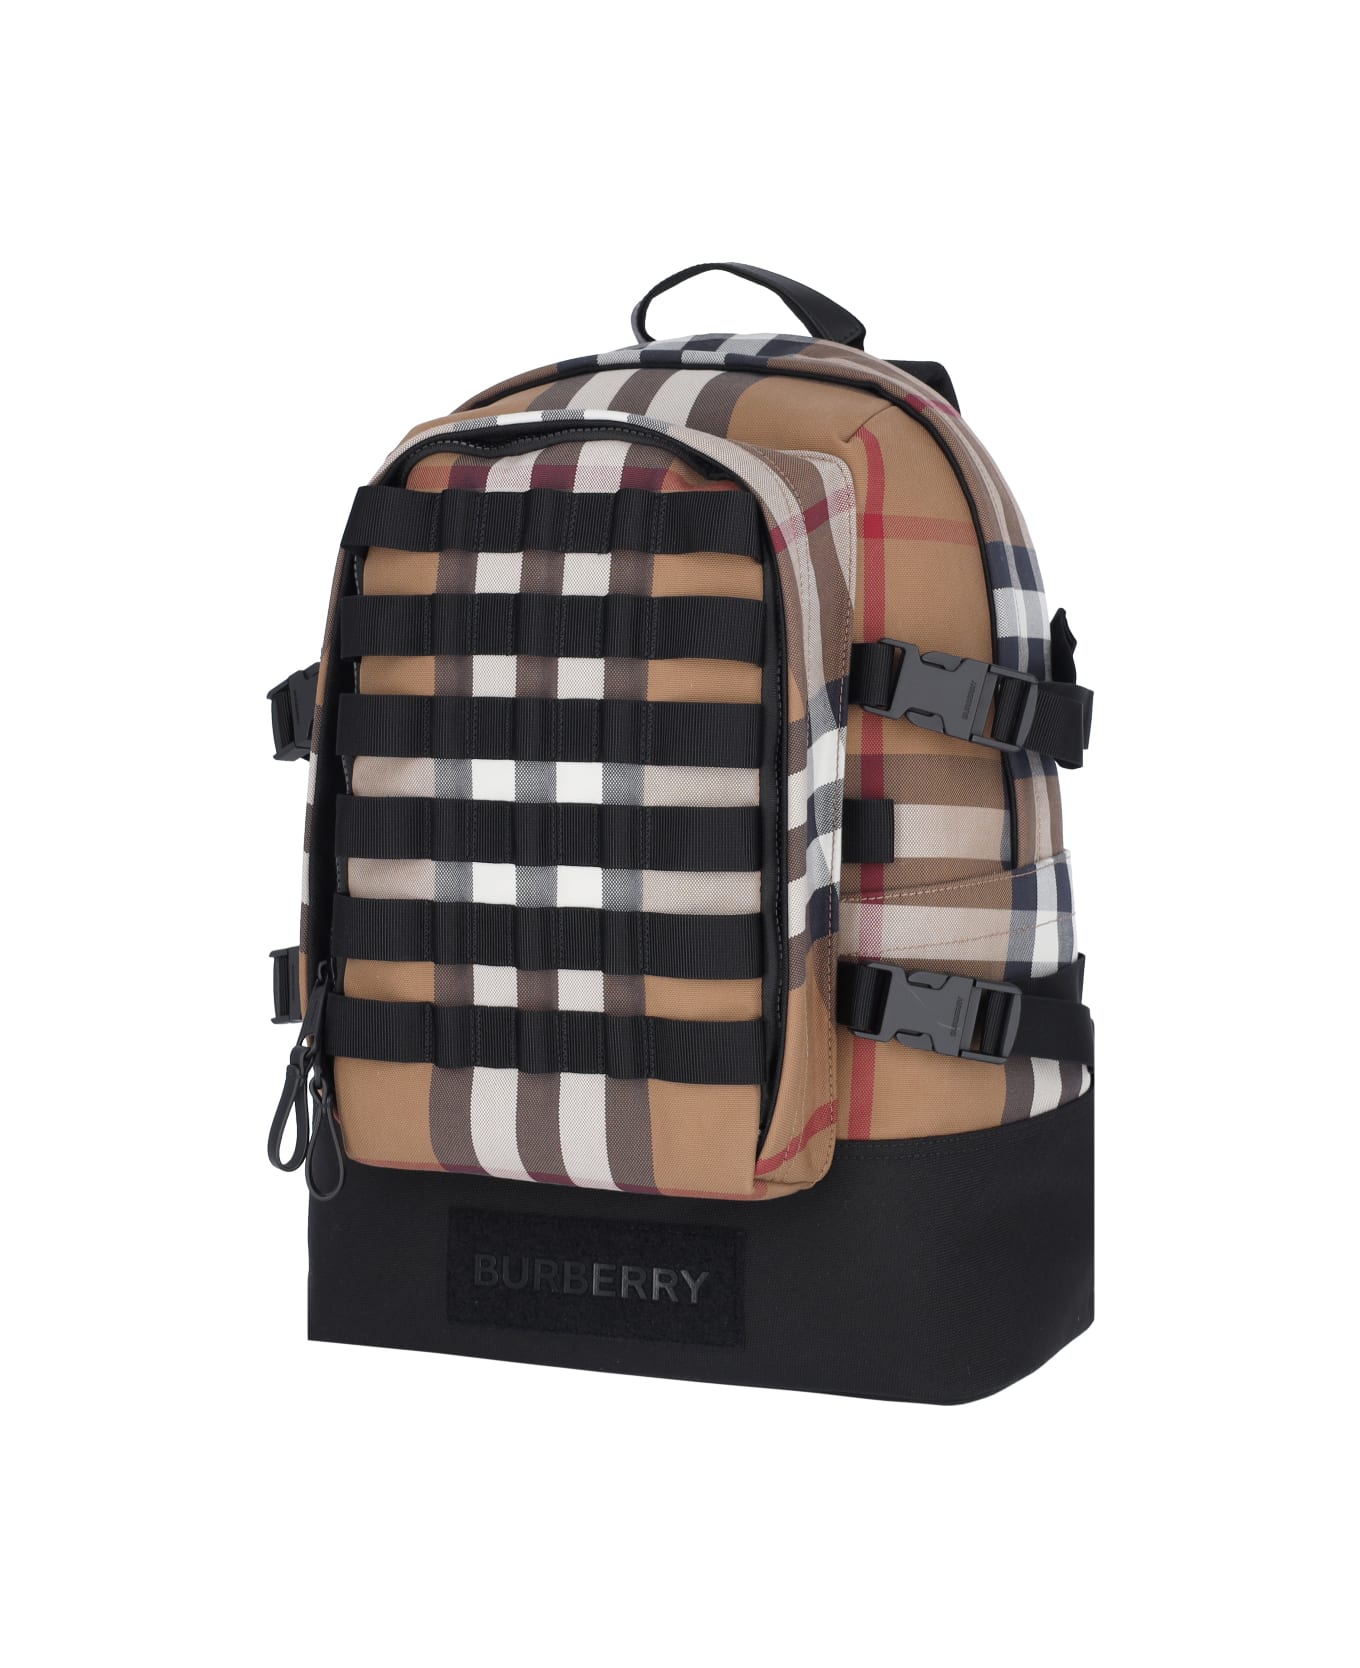 Burberry 'vintage Check' Backpack - Brown